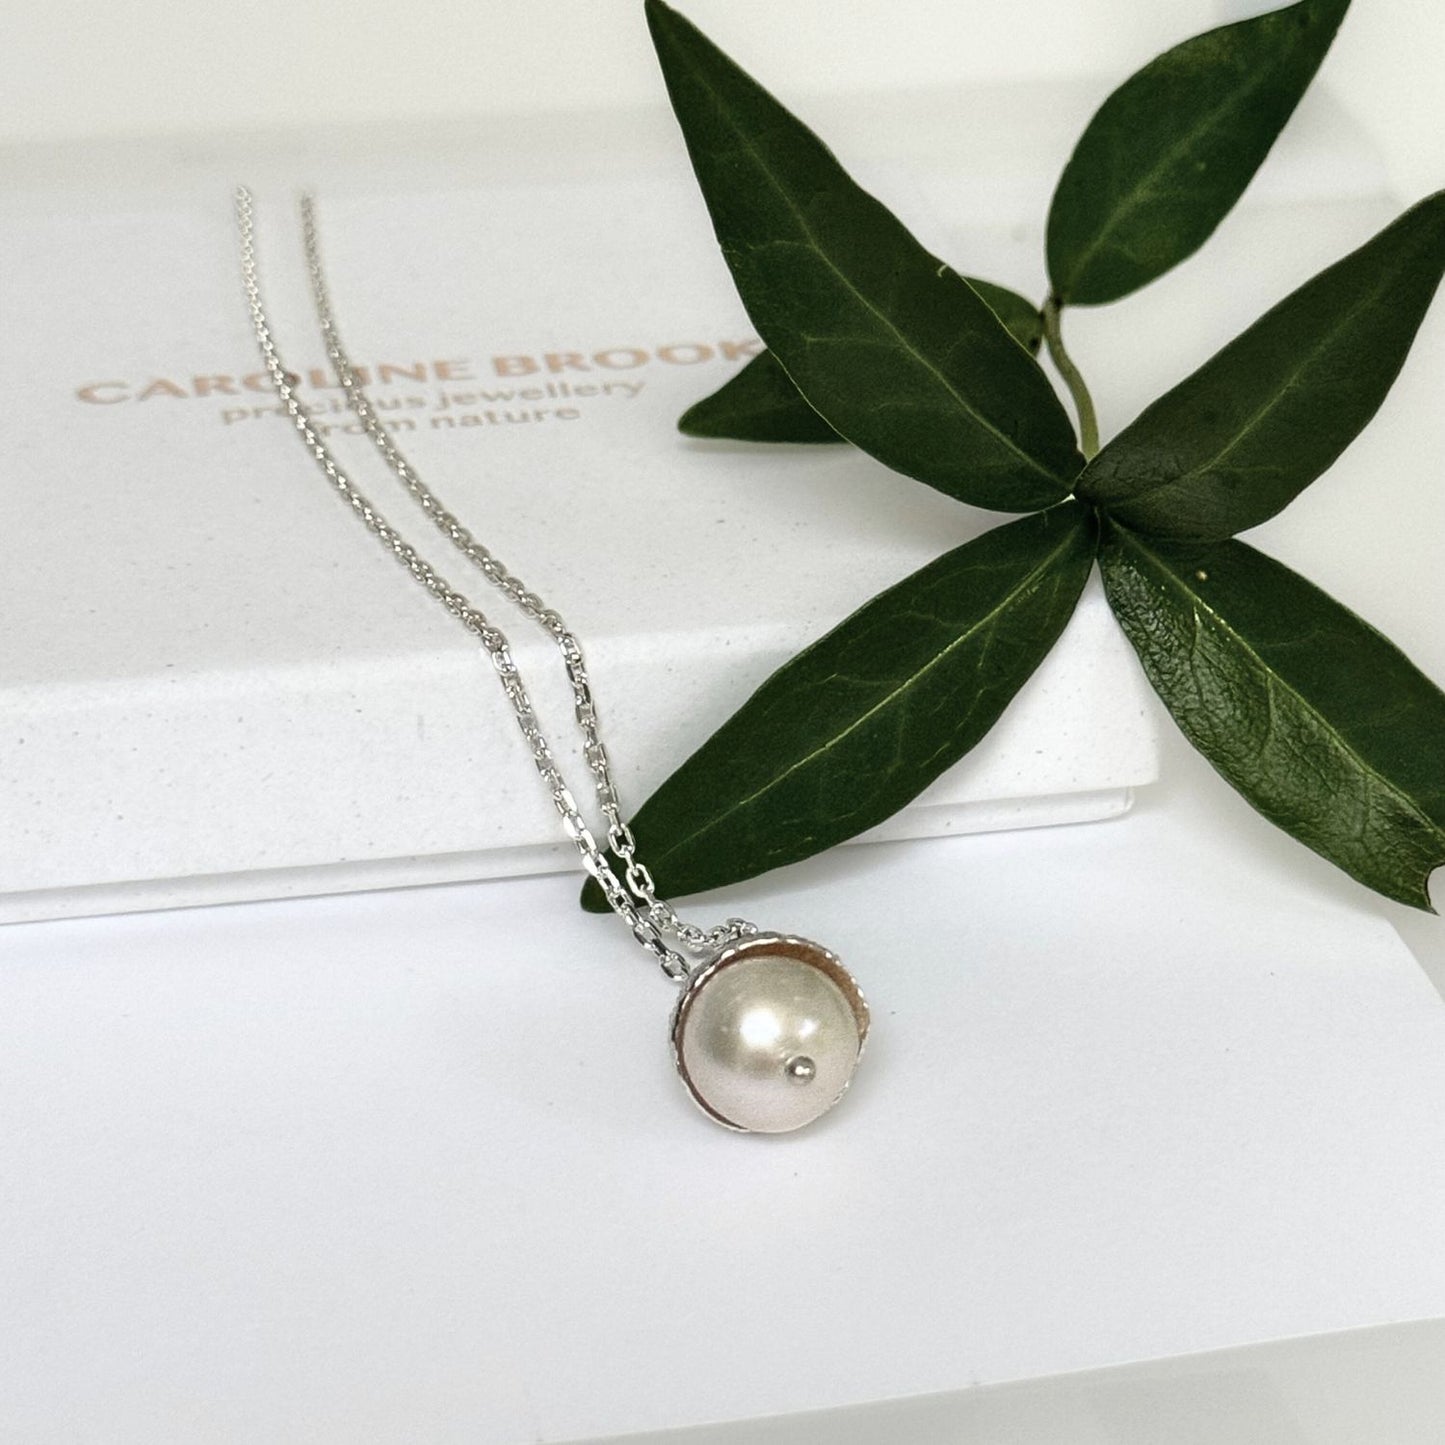 Acorn cup necklace with a pearl